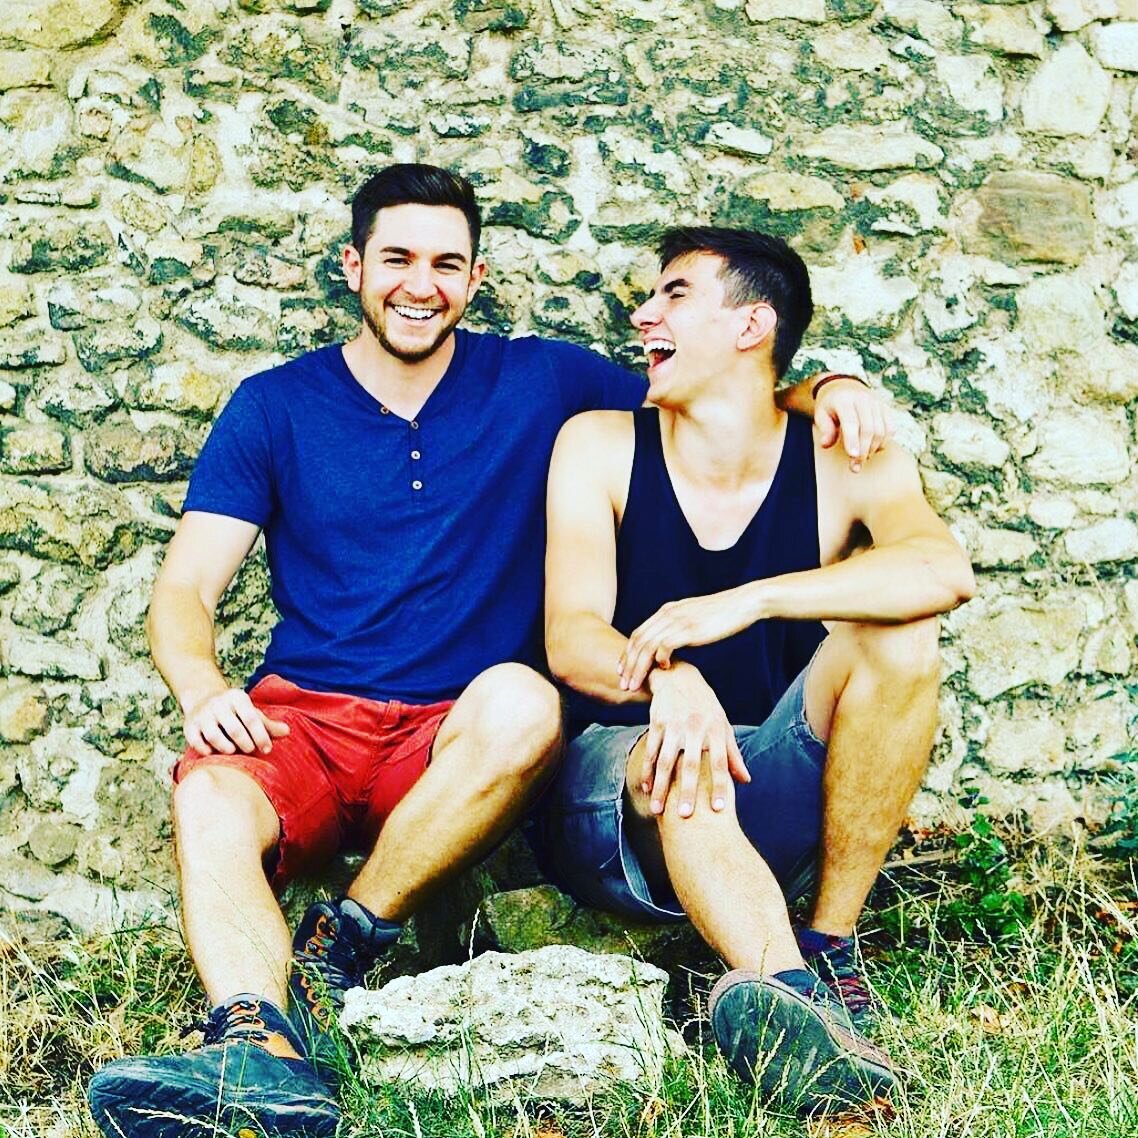 Daniel &amp; Jonas Brand of @brandbros_official are fun-loving, passionate 5th generation winemaking brothers based in Bockenheim, Germany, focused on shaking up the historic Pfalz region. In fact, one might say it&rsquo;s all in the name - with thei